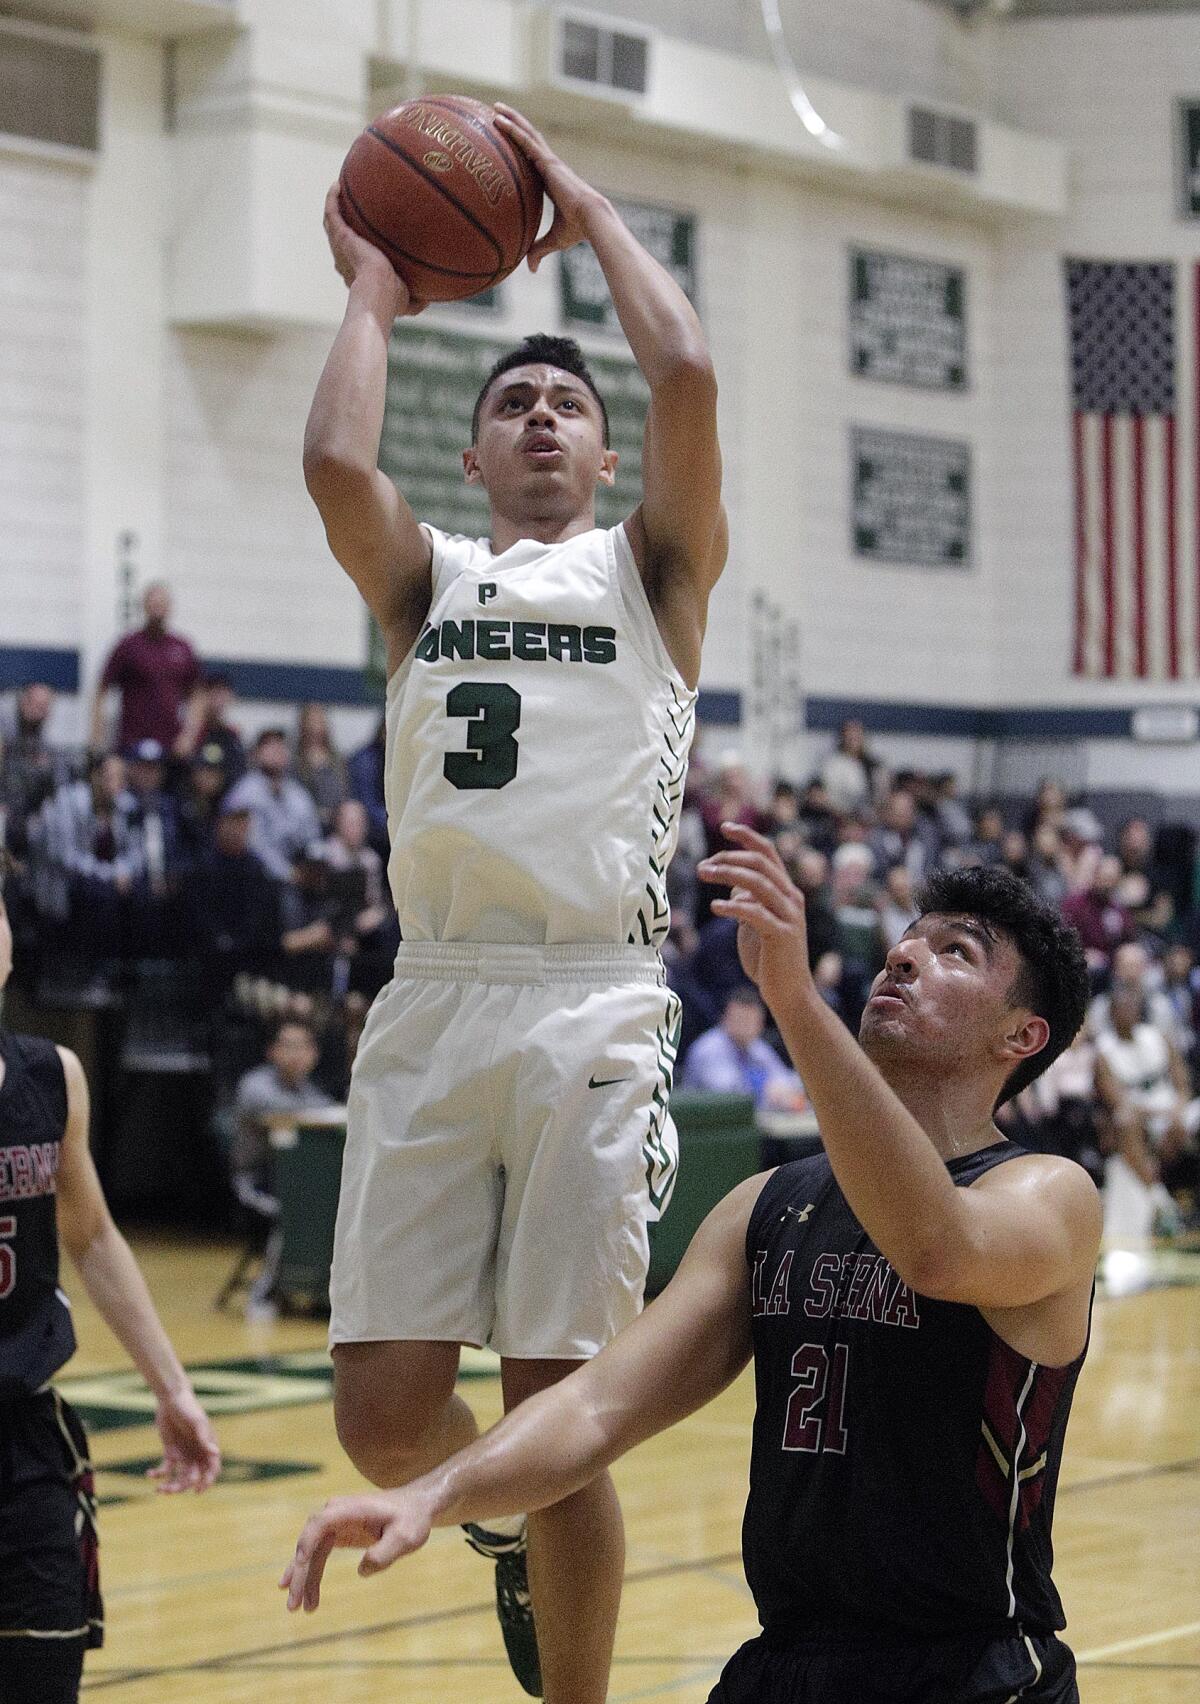 Providence's Bryce Whitaker shoots against La Serna's Jacob Leija in the CIF Southern Section Division III-AA quarterfinal boys' basketball playoff at Providence High School on Tuesday, February 18, 2020.